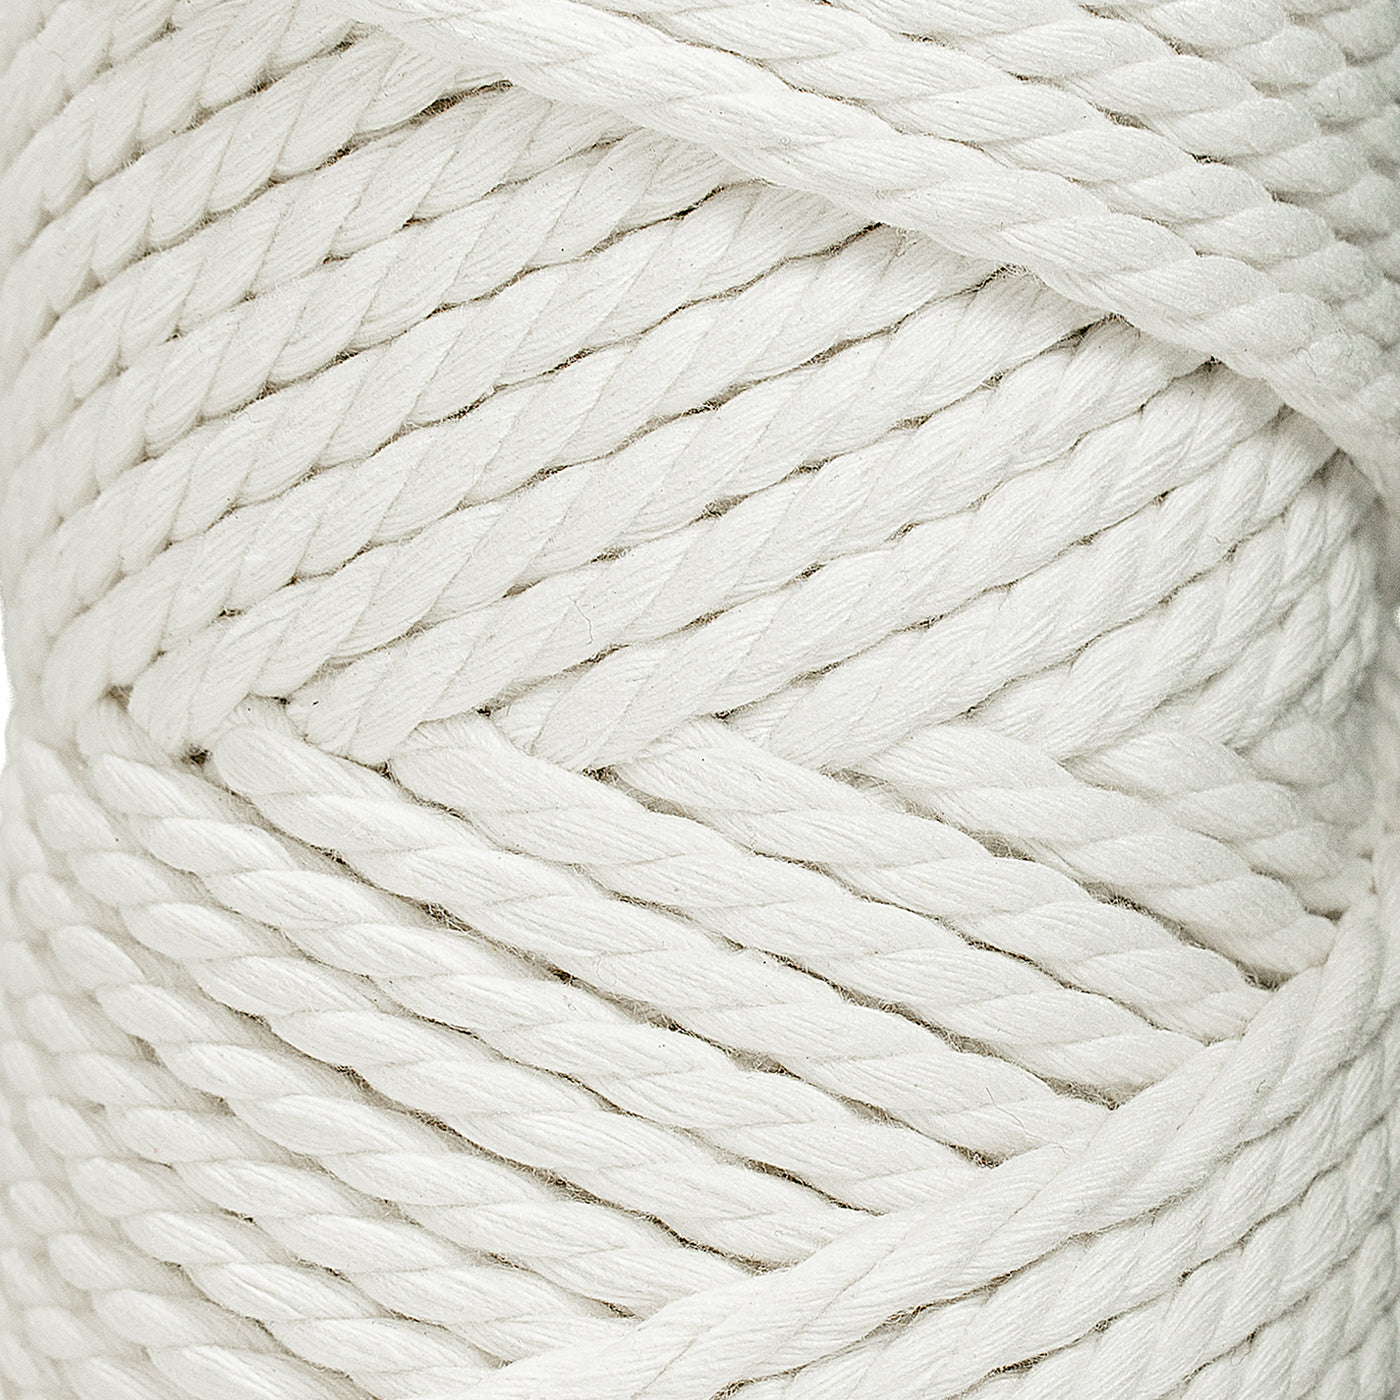 COTTON ROPE ZERO WASTE 5 MM - 3 PLY - IVORY COLOR